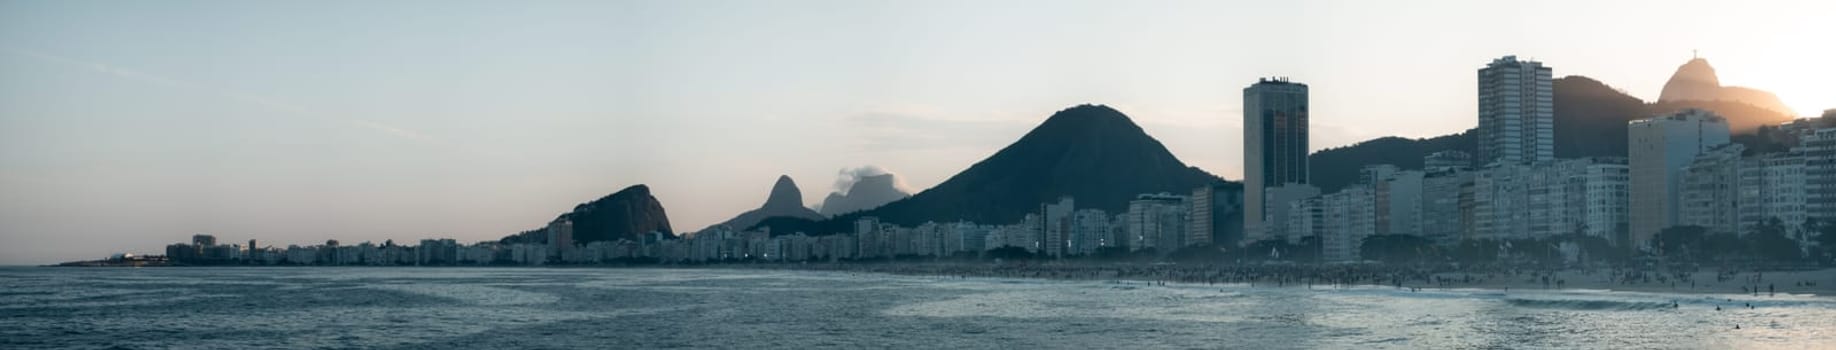 Tranquil view of Rio de Janeiro's skyline featuring Sugarloaf Mountain at sunset.